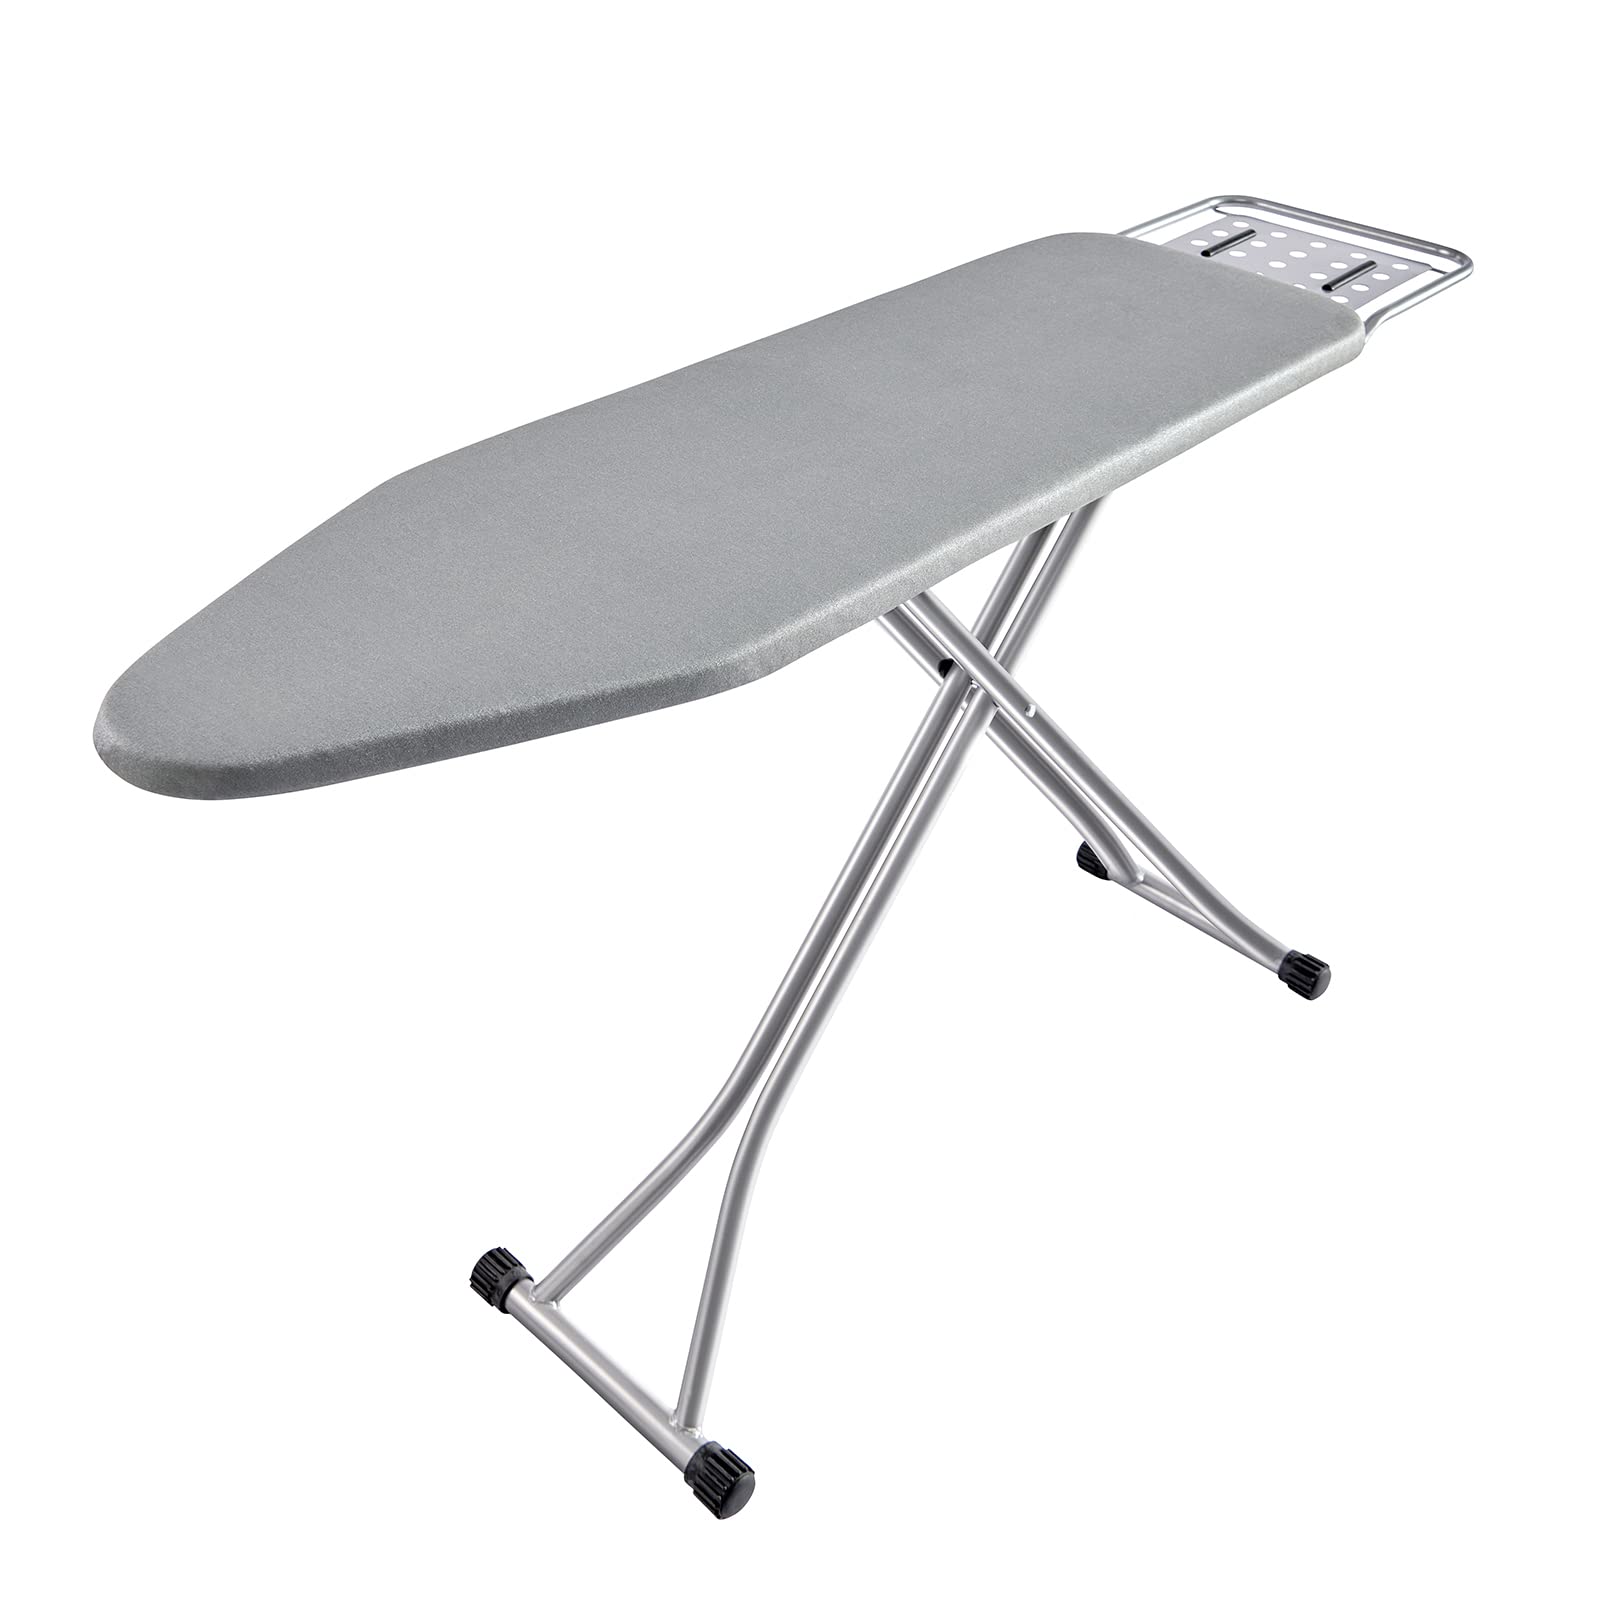 BKTD Ironing Board, Heat Resistant Cover Iron Board with Steam Iron Rest, Non-Slip Foldable Ironing Stand. Heavy Sturdy Metal Frame Legs Iron Stand(13 * 34 * 53 Inches) Silver Gray Color